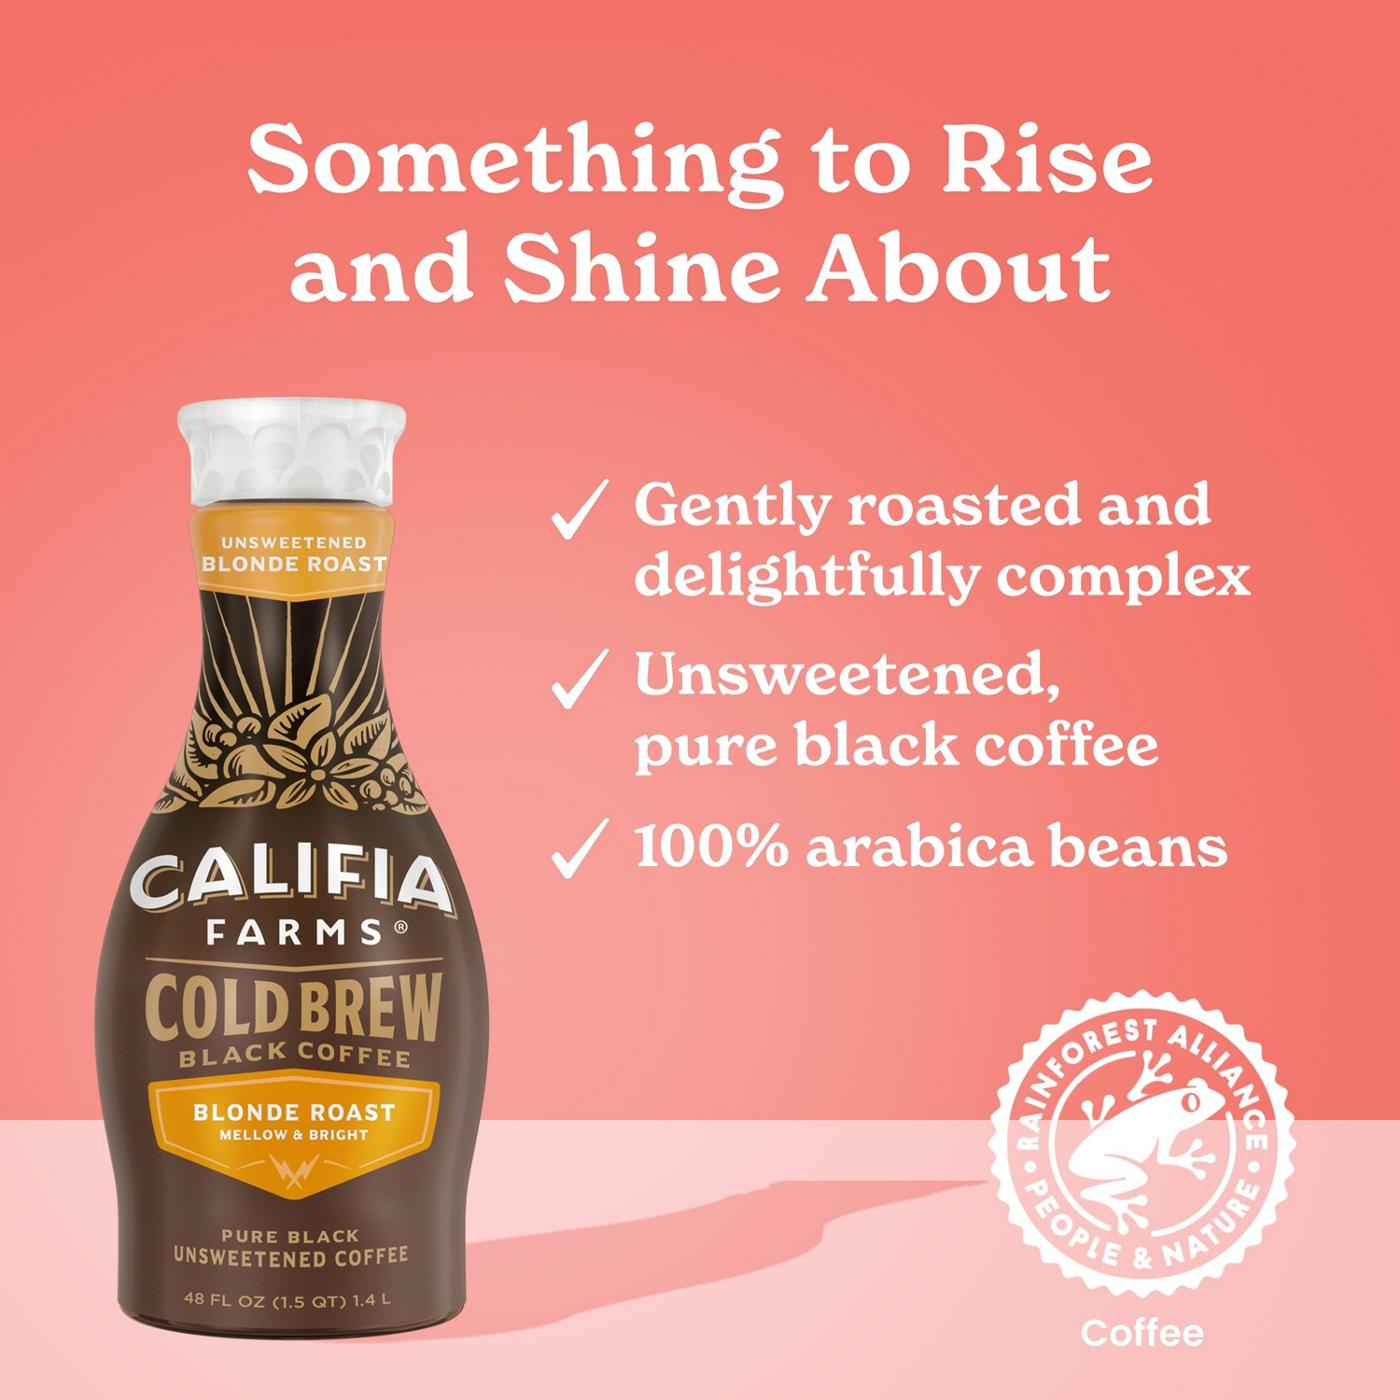 Califia Farms Pure Black Unsweetened Blonde Roast Cold Brew Coffee; image 2 of 2